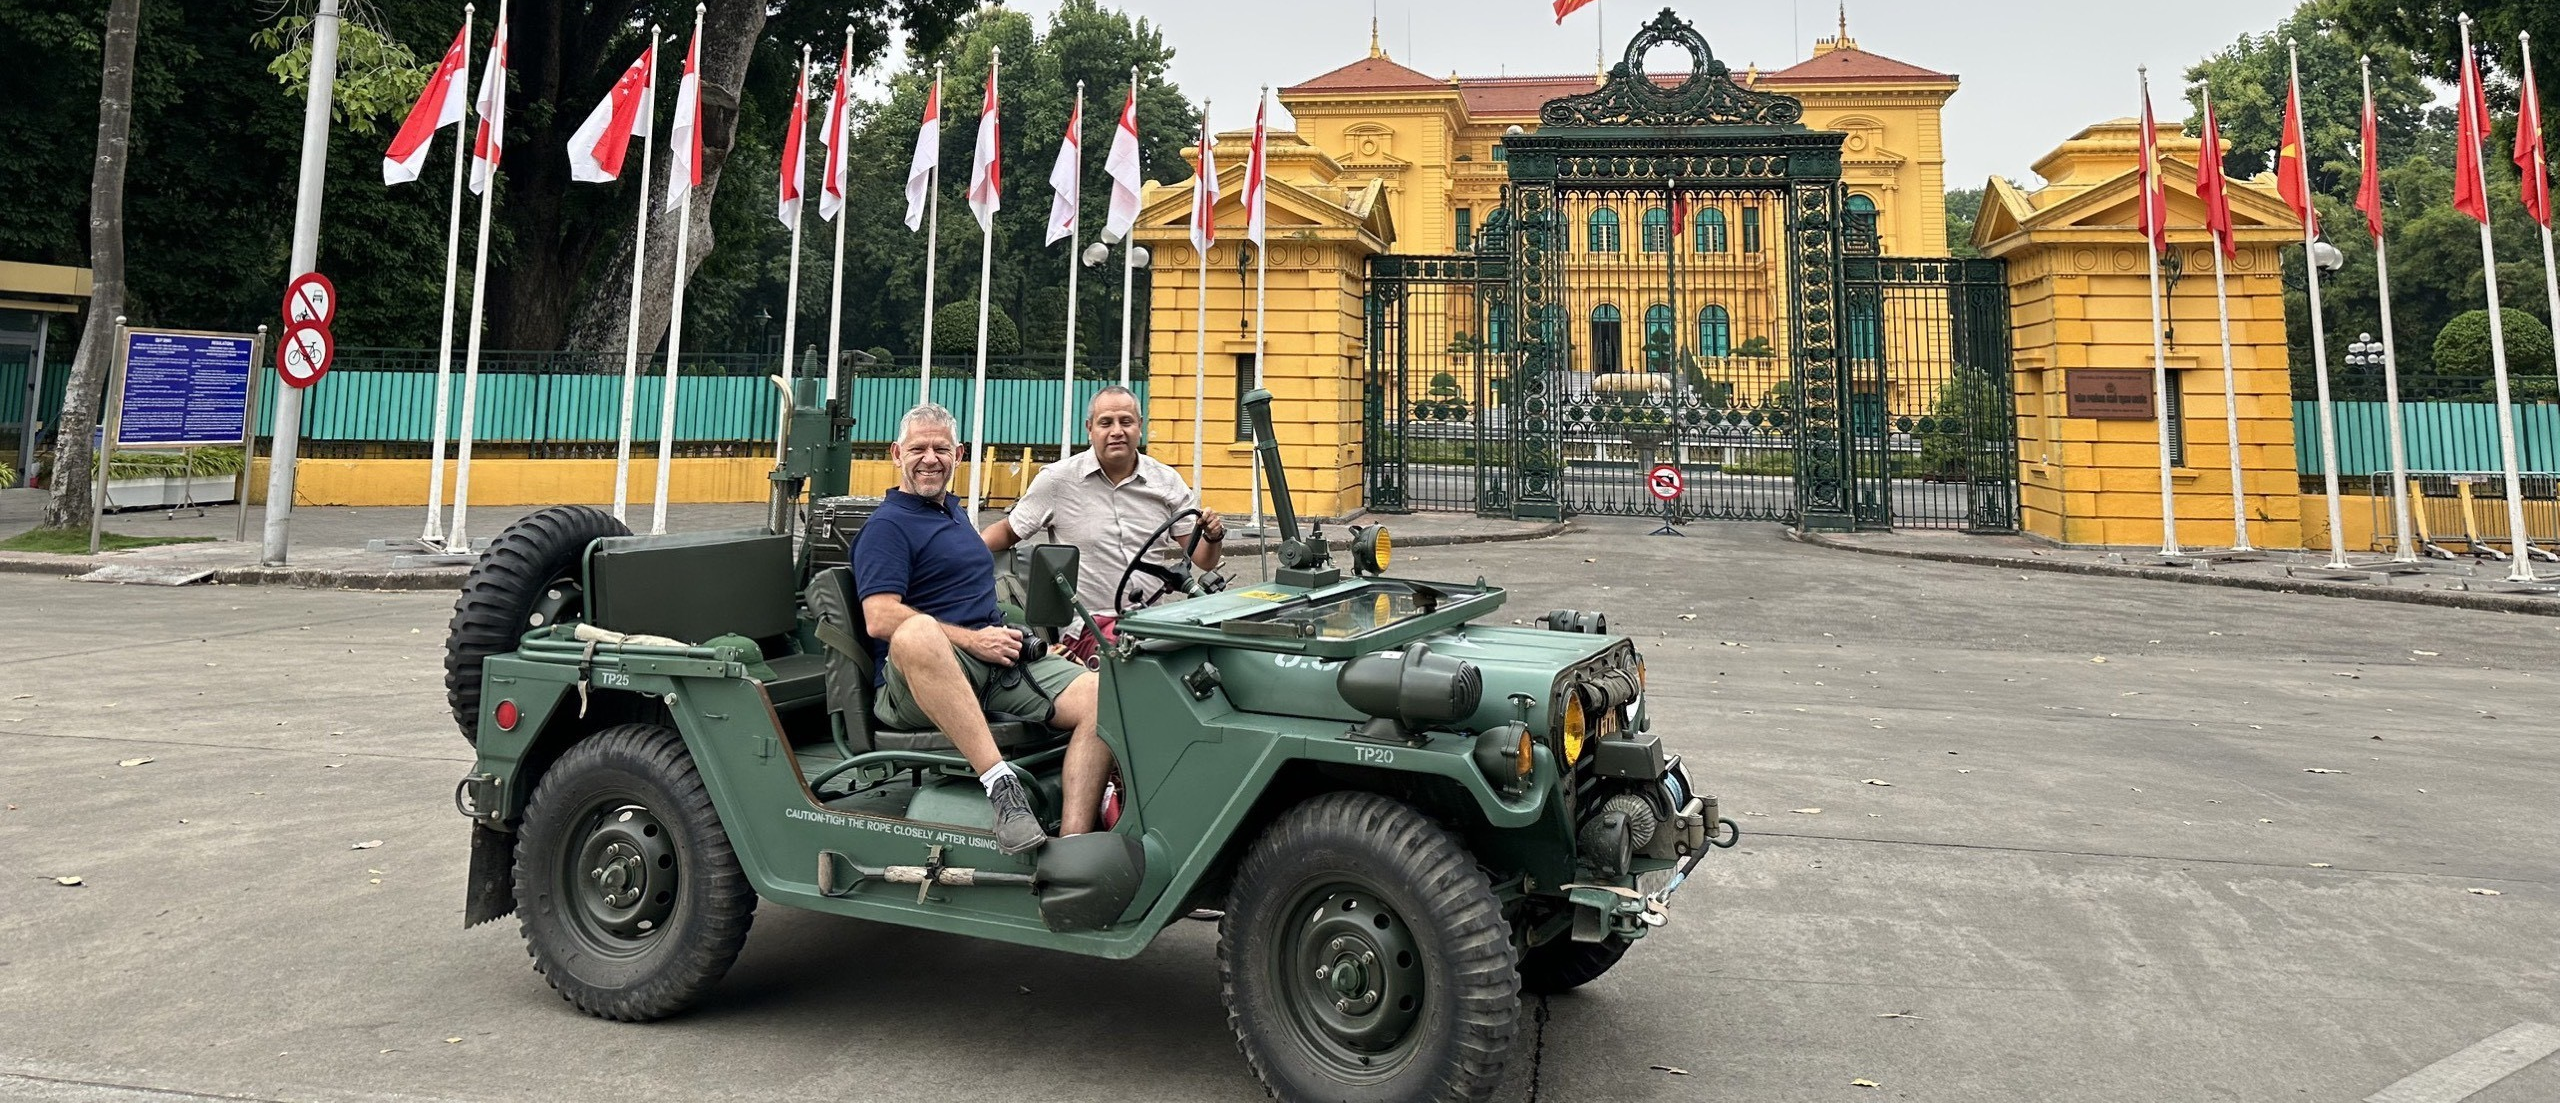 Image of Hanoi’s Hidden Gems By Vintage Jeep